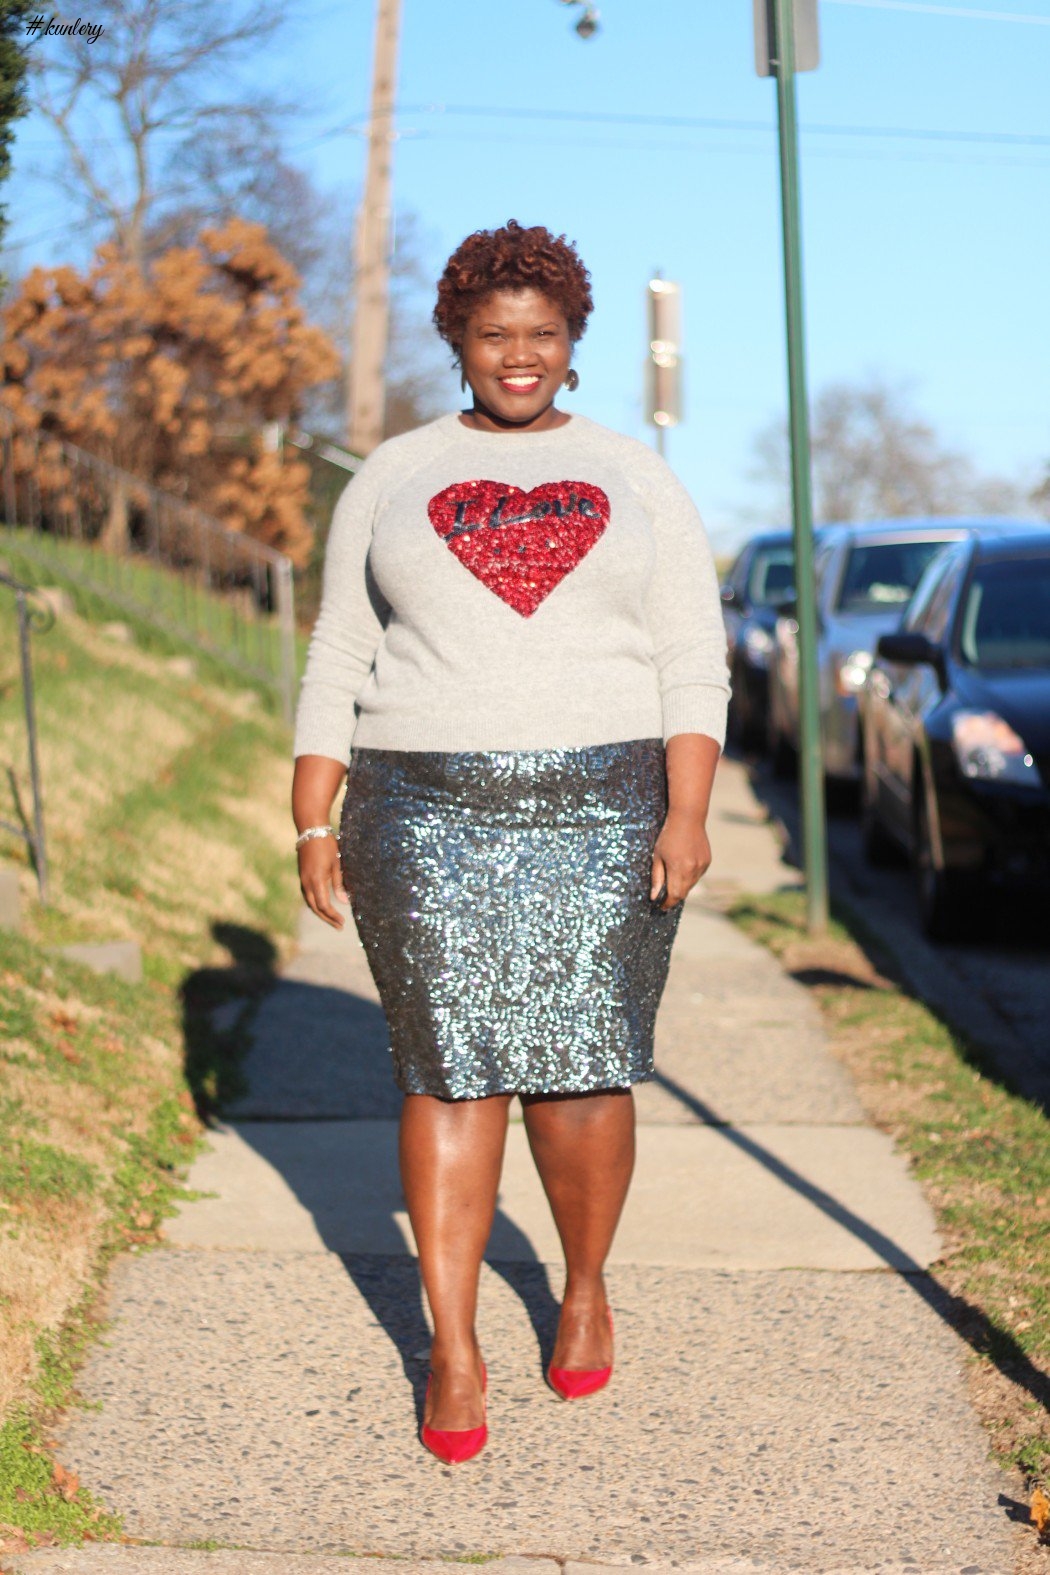 SEQUIN SKIRTS WITH THE PLUS SIZE FASHIONISTAS